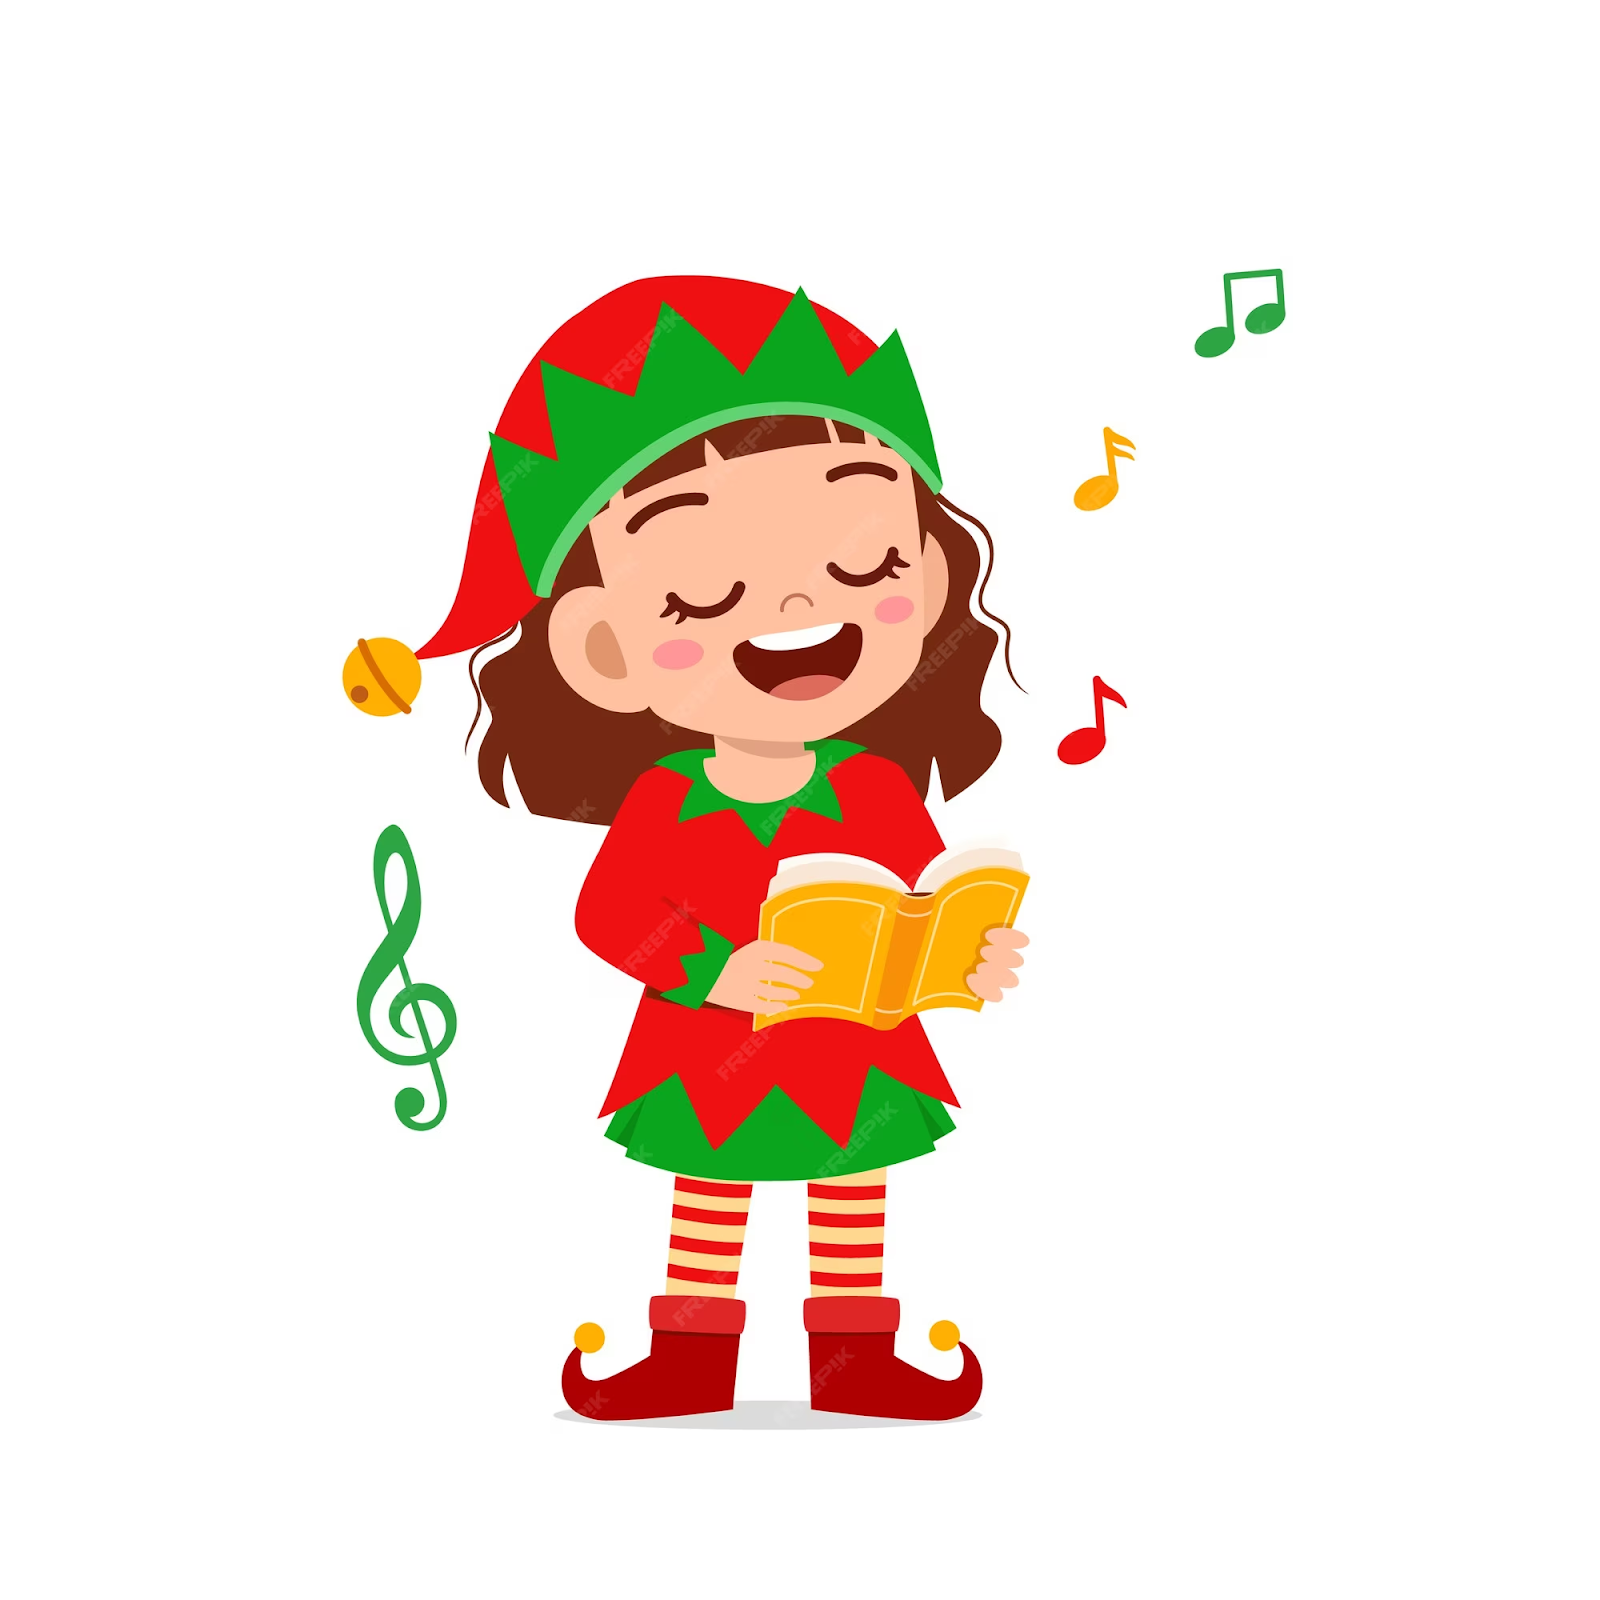 Graphic of A Girl in Red Dress Singing Christmas Songs With Songs Book in Her Hand